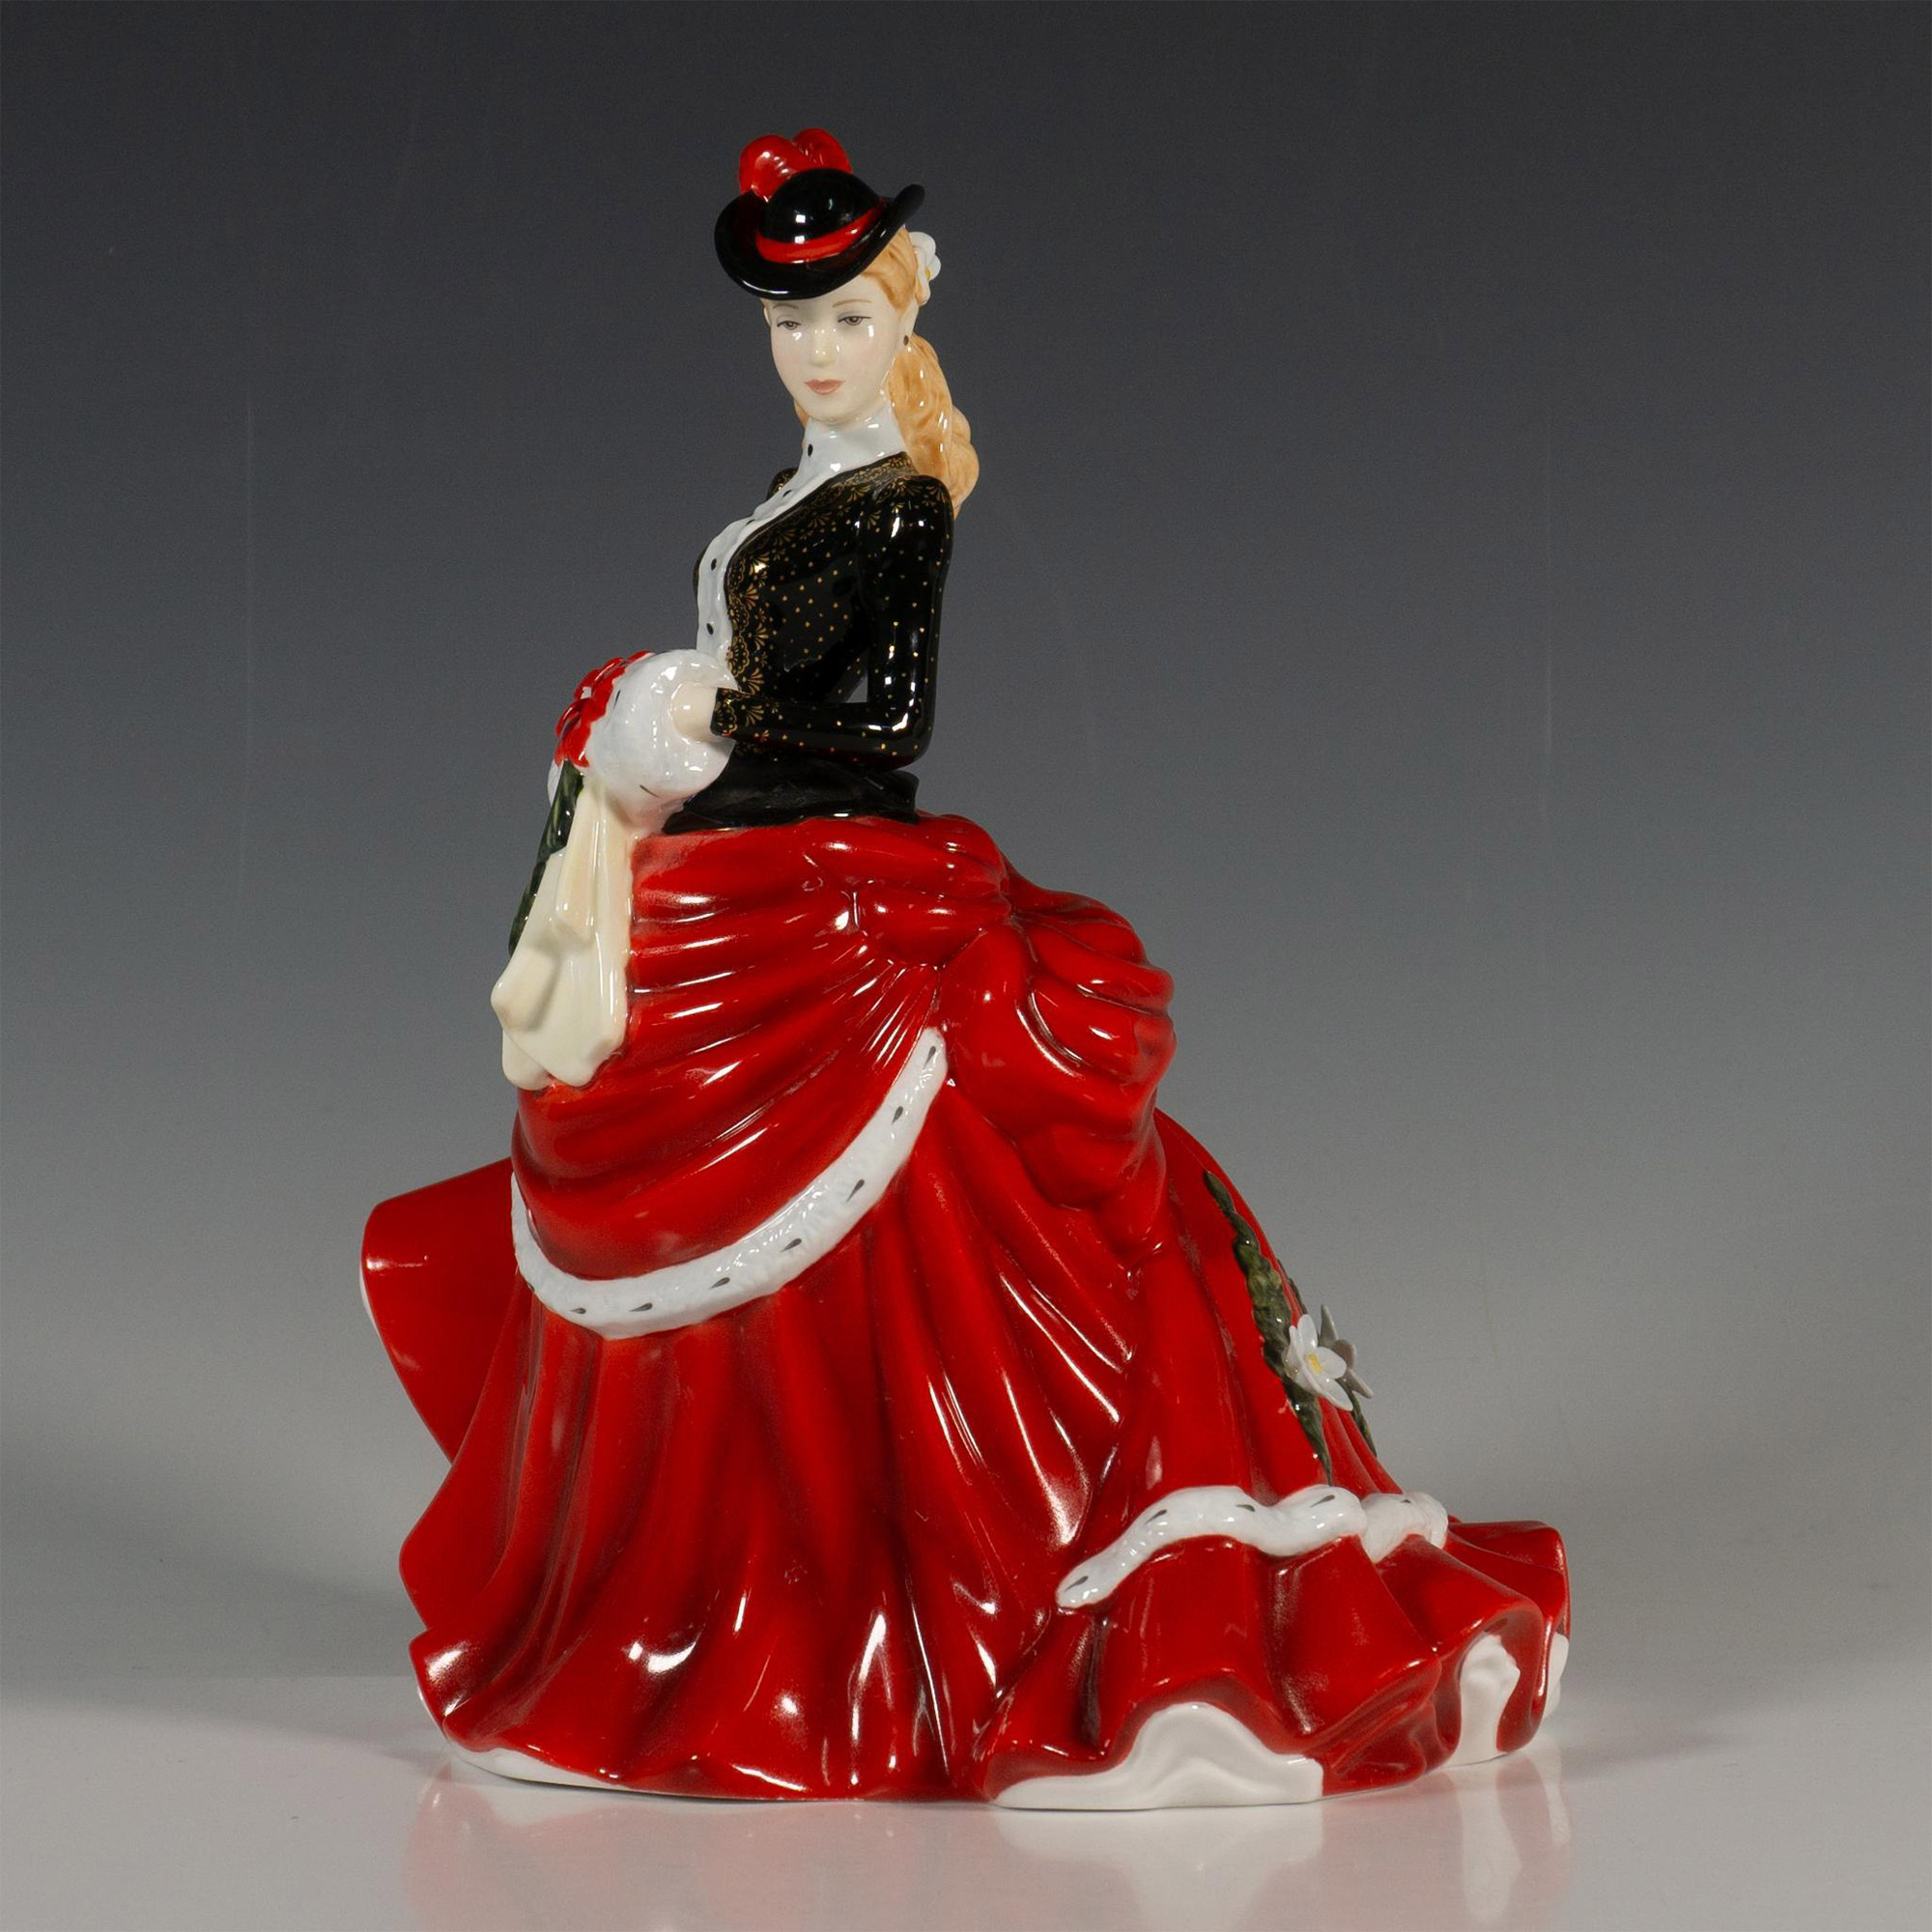 Holly HN5846 - Royal Doulton Figurine - Image 2 of 5